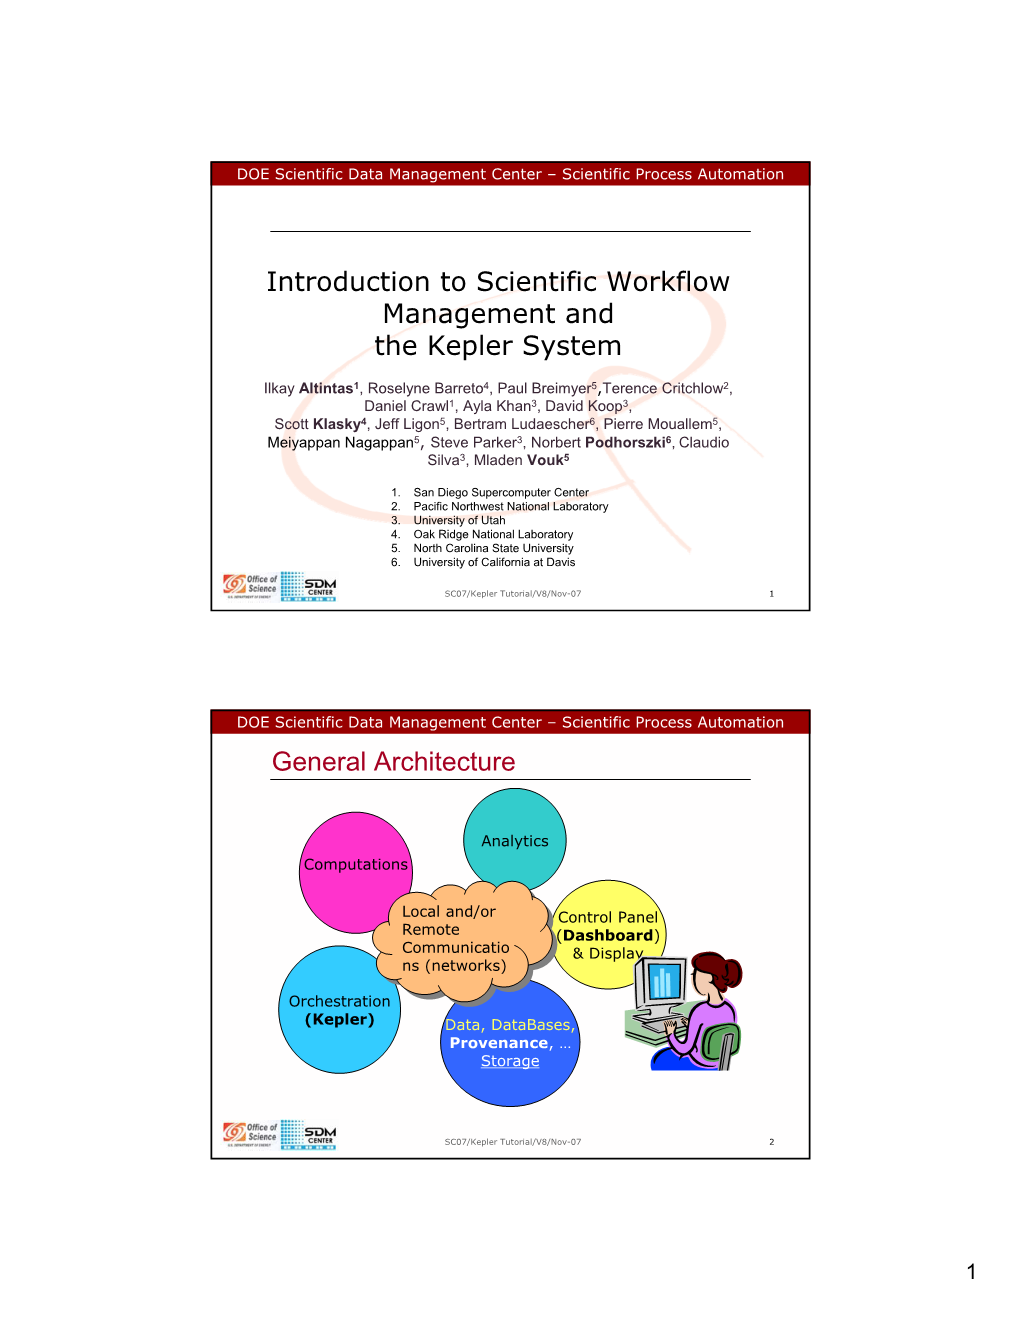 Introduction to Scientific Workflow Management and the Kepler System